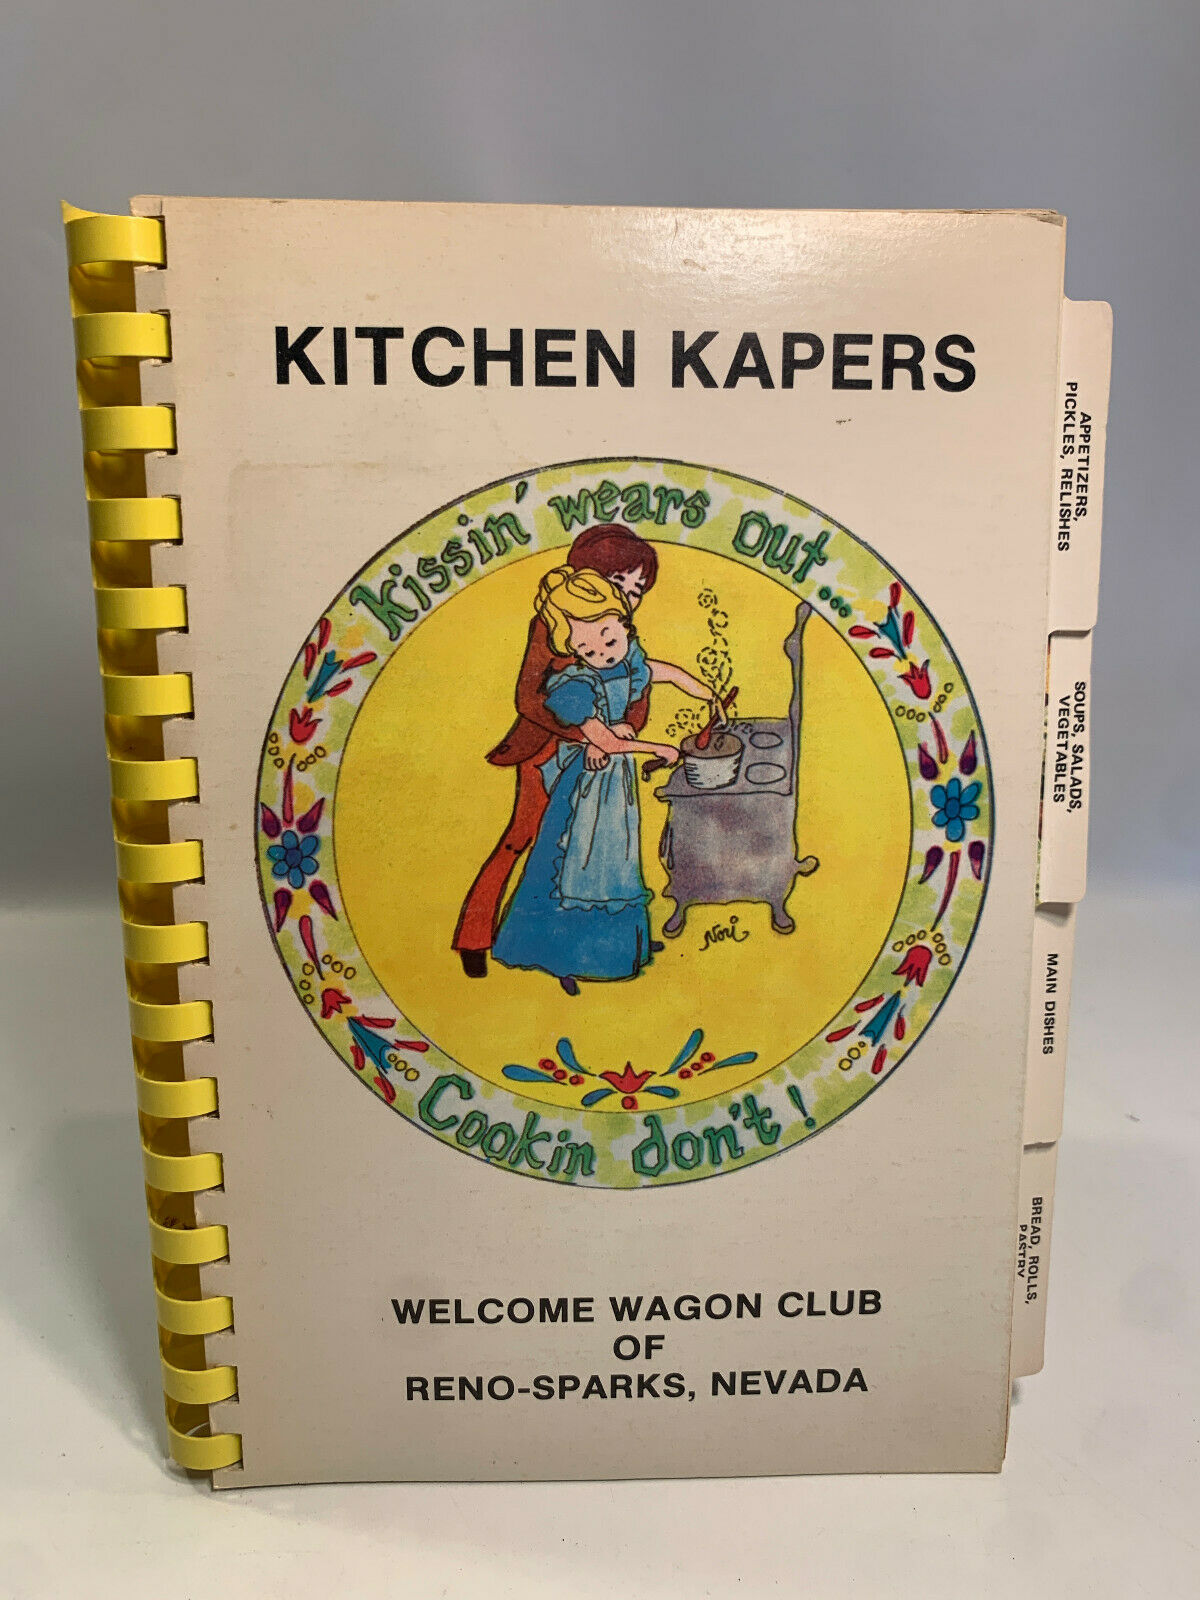 Kitchen Kapers by Welcome Wagon Club Reno-Sparks, Nevada